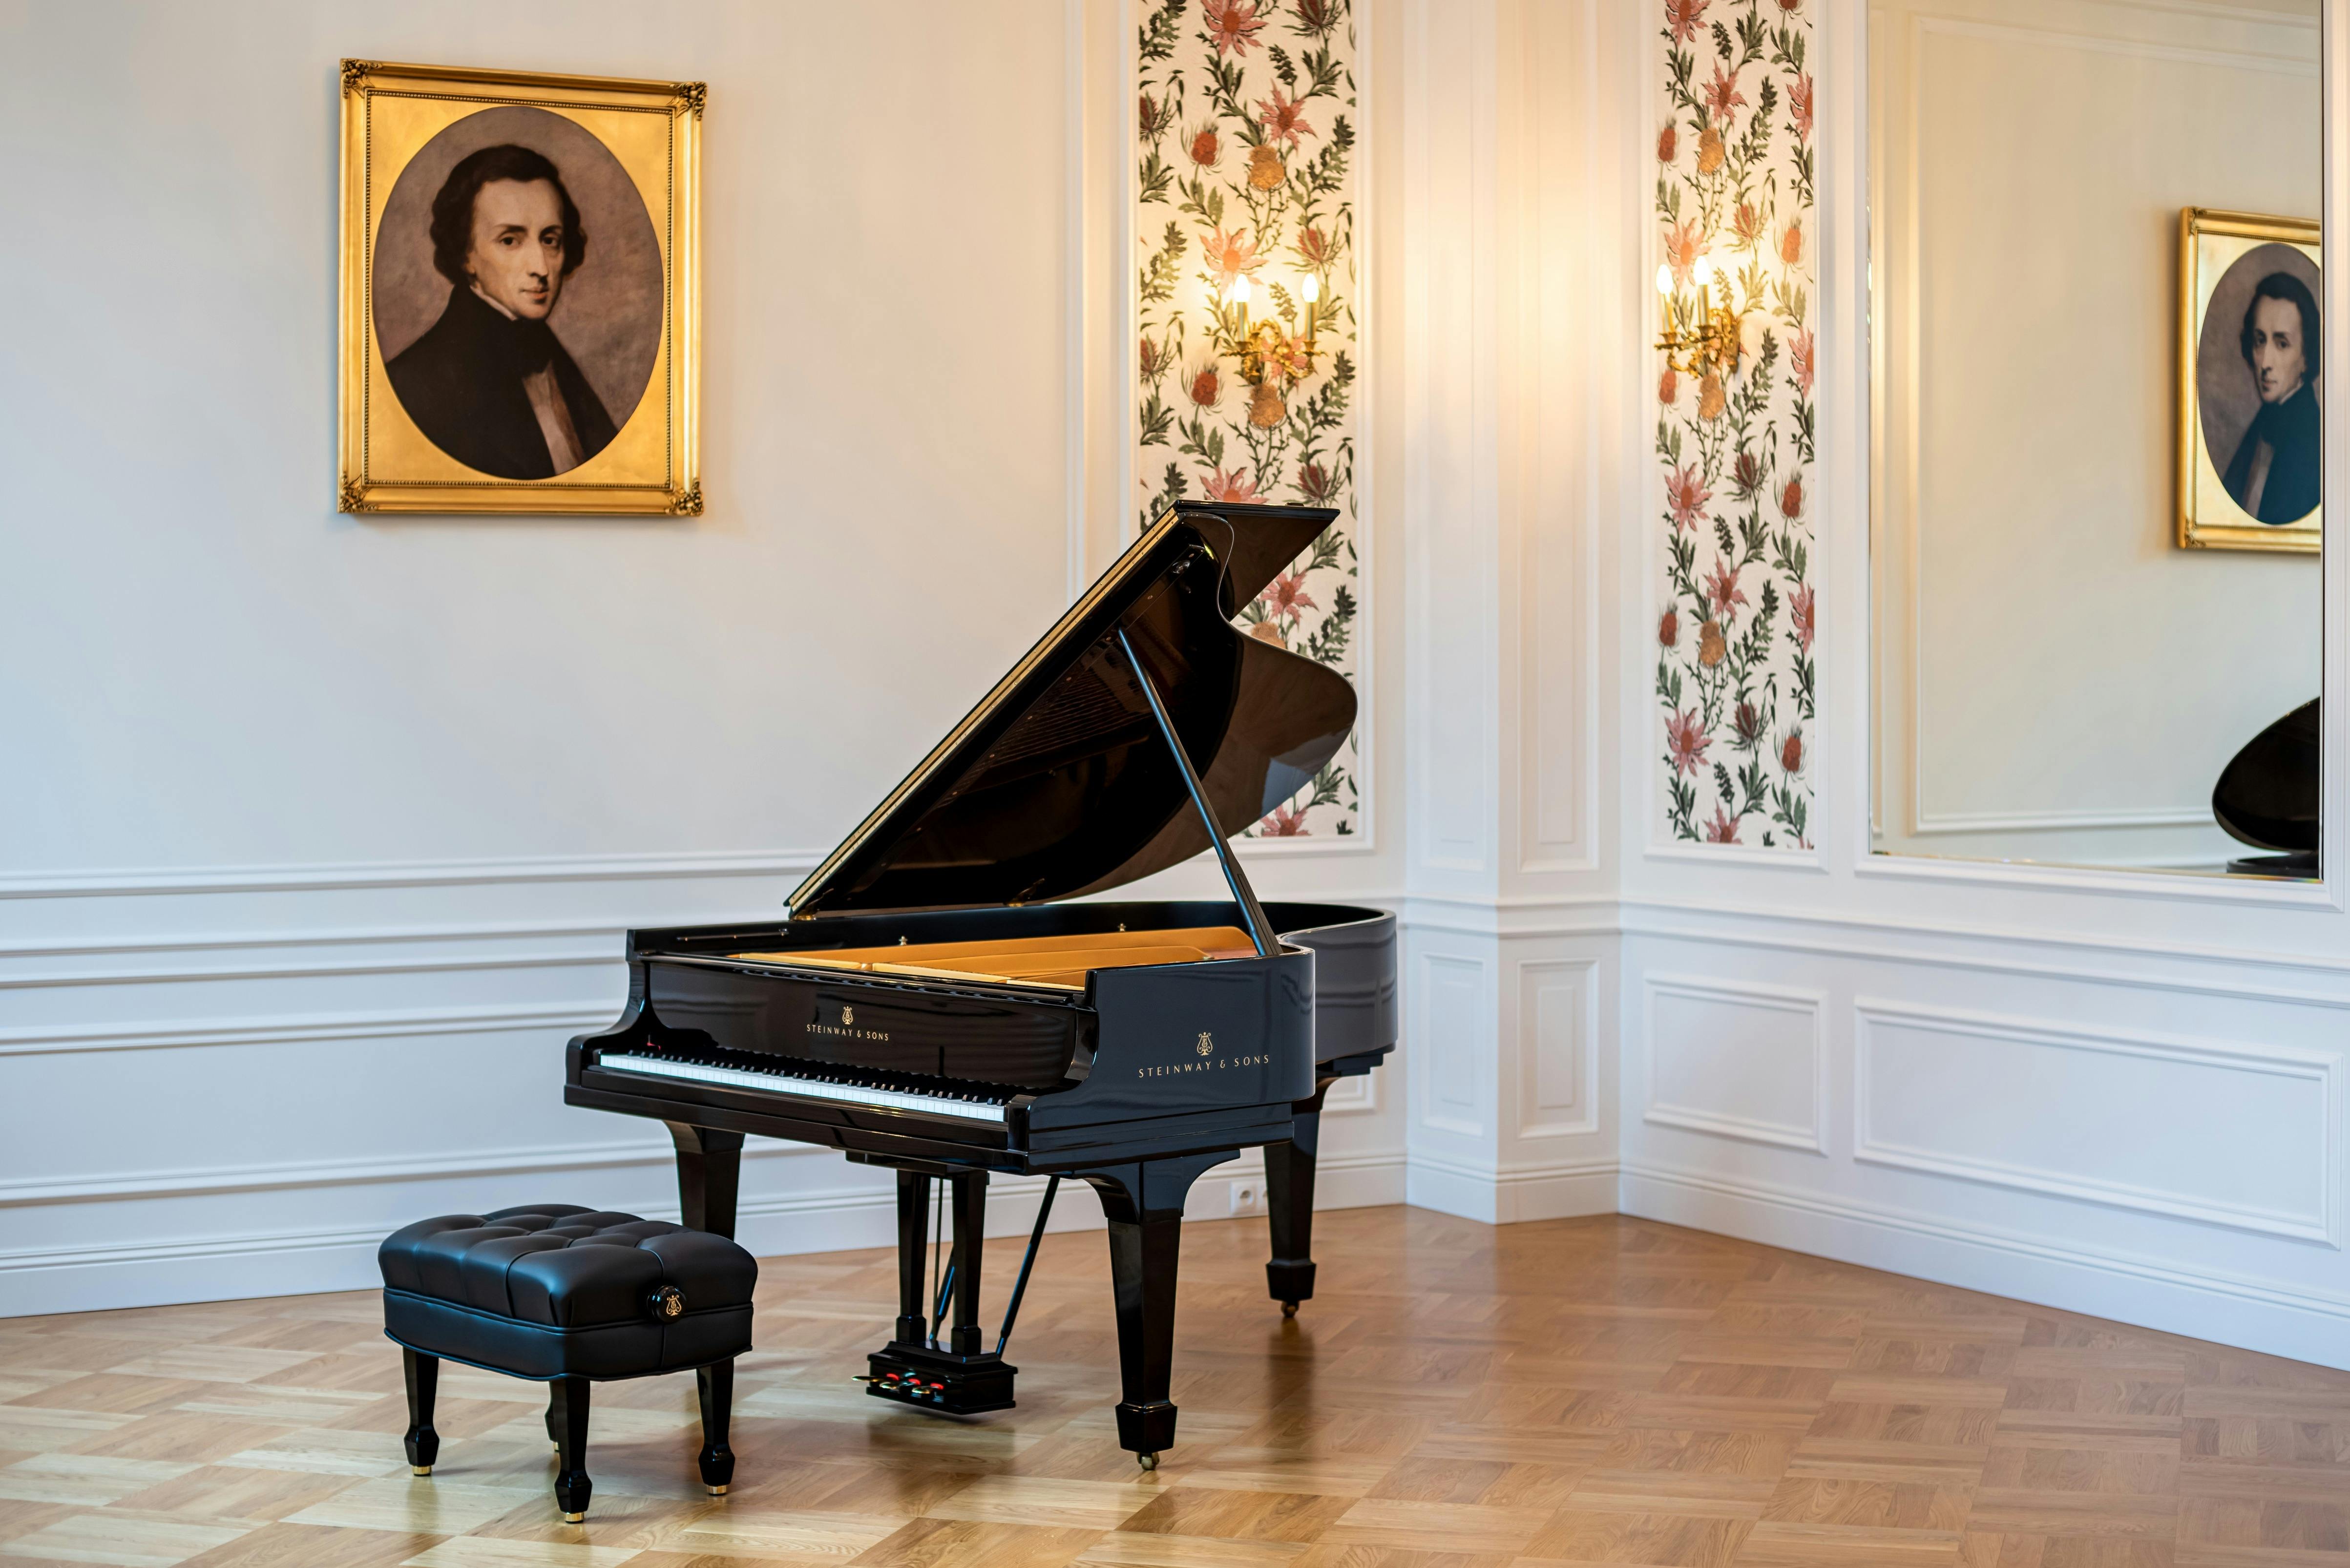 Tickets for Chopin concerts at Warsaw Fryderyk Concert Hall Musement